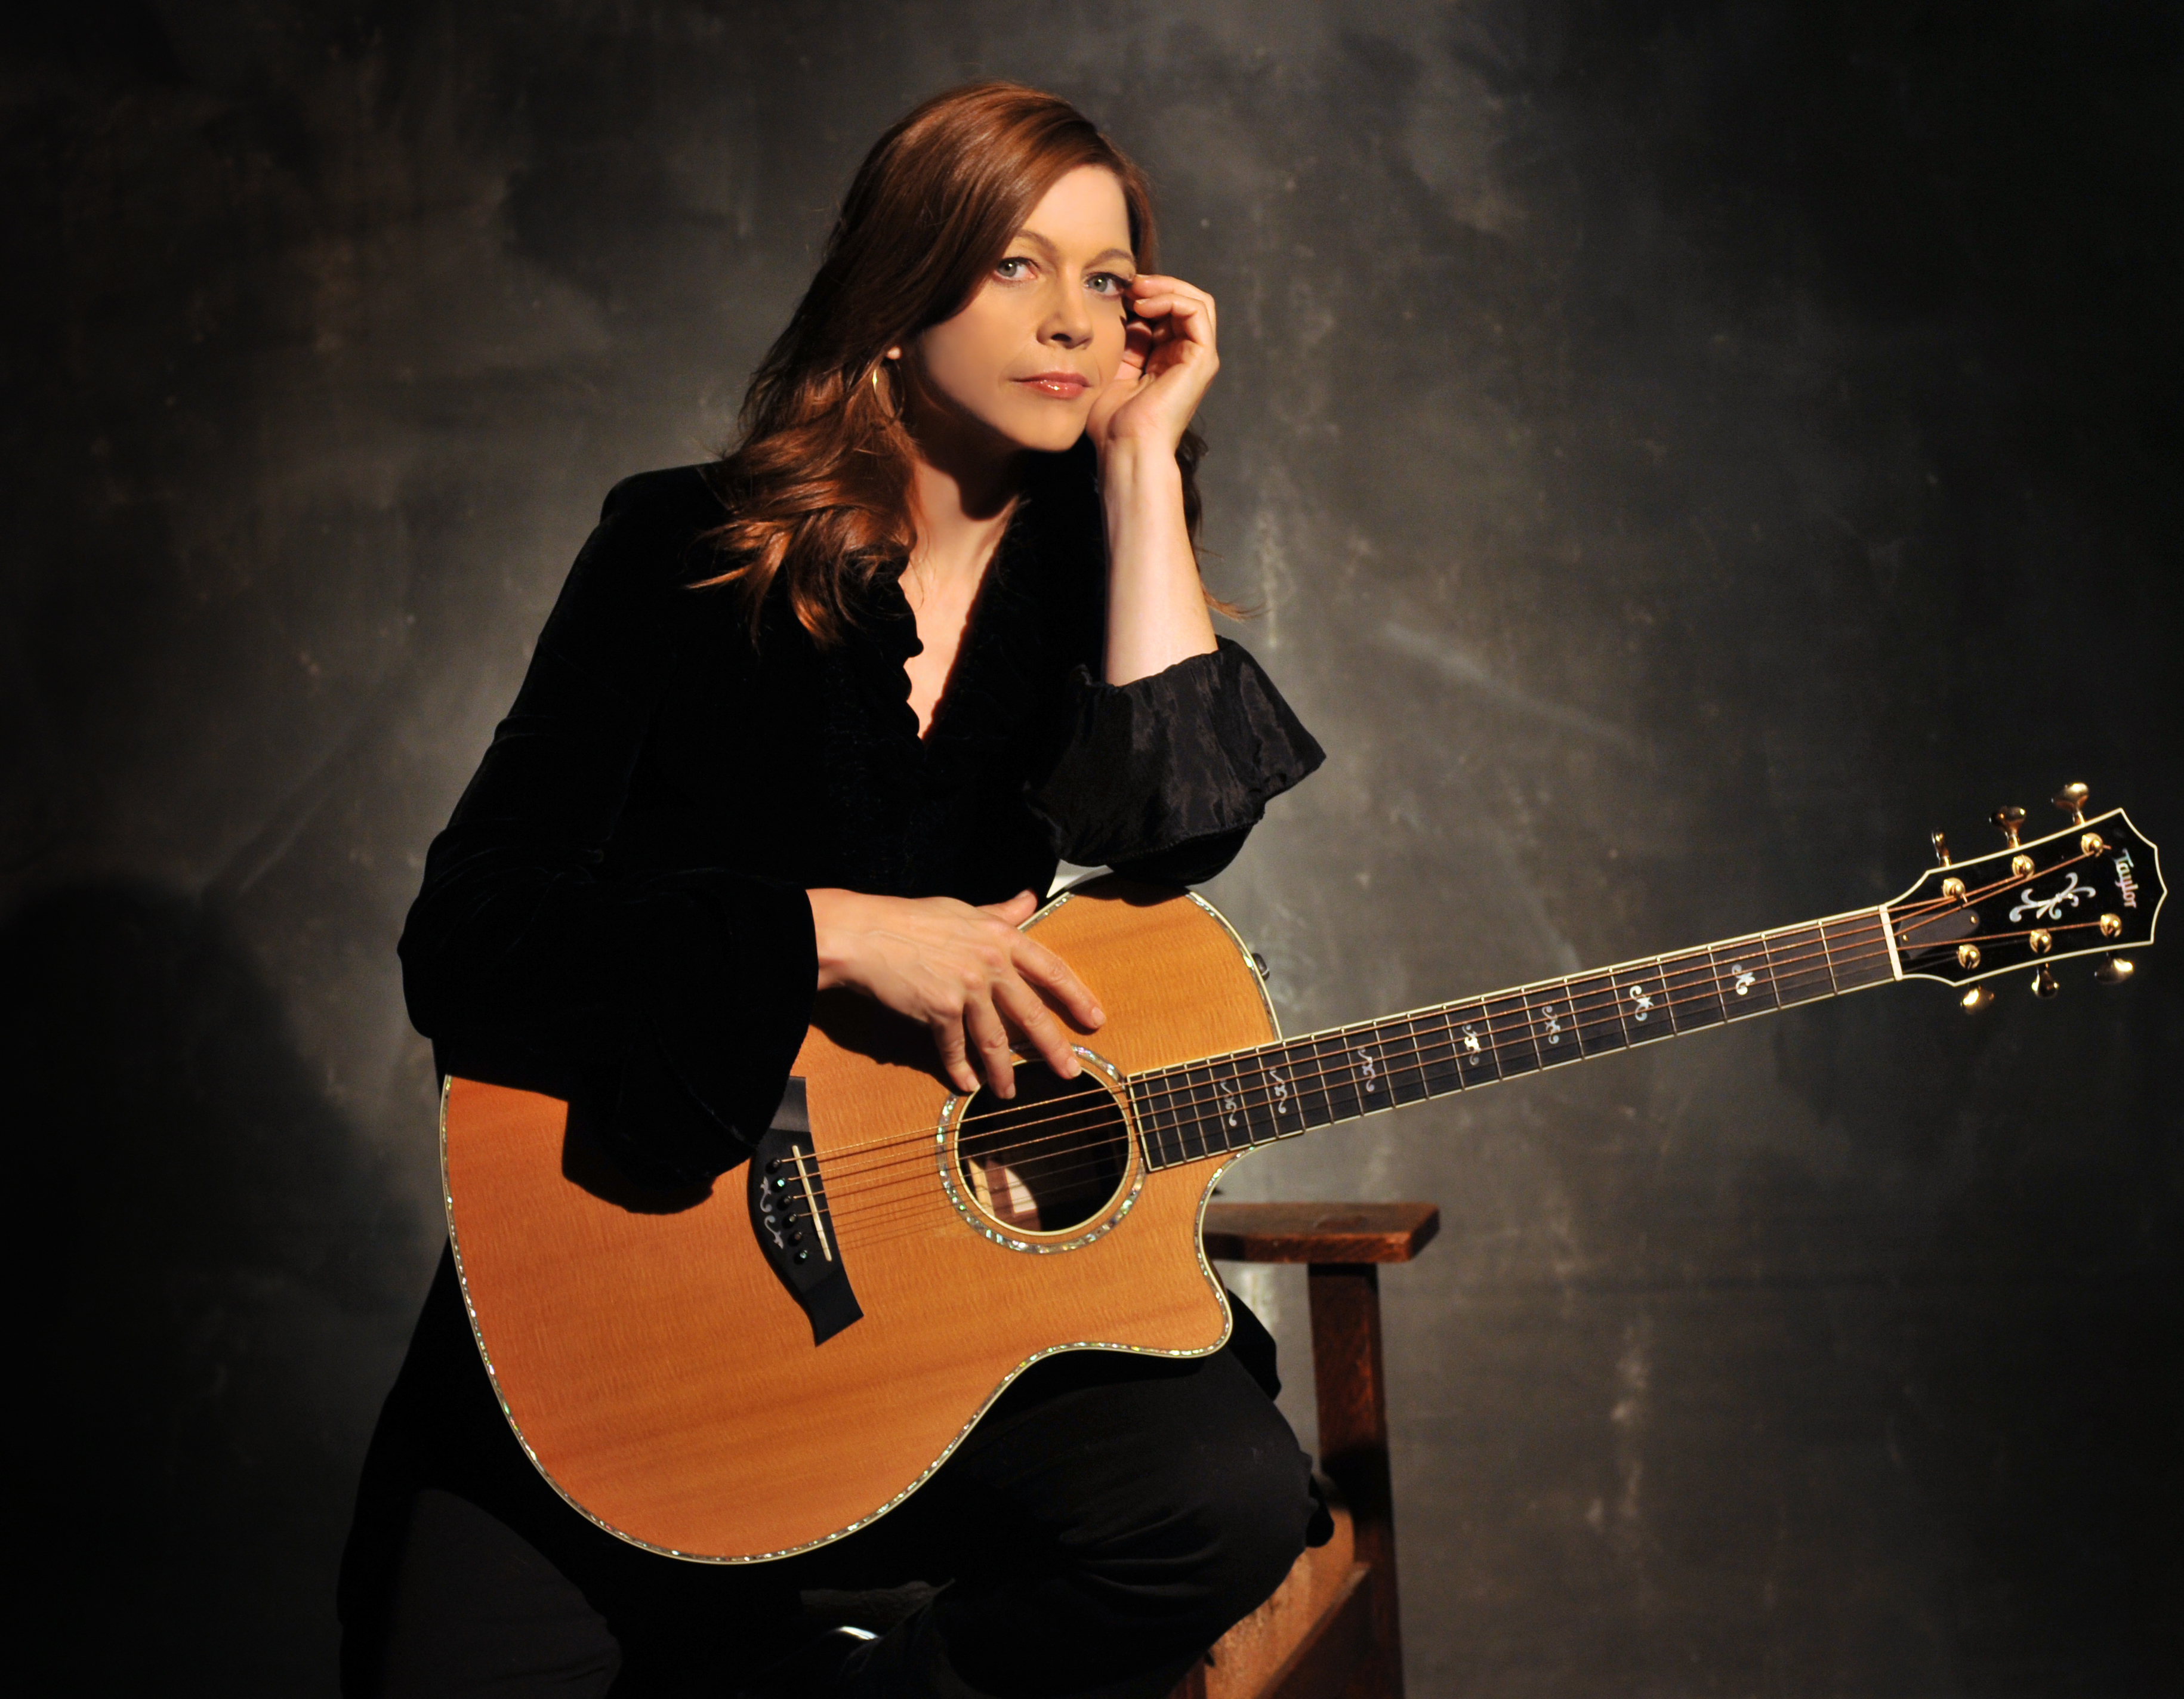 Carrie Newcomer to perform at First Christian Church Saturday